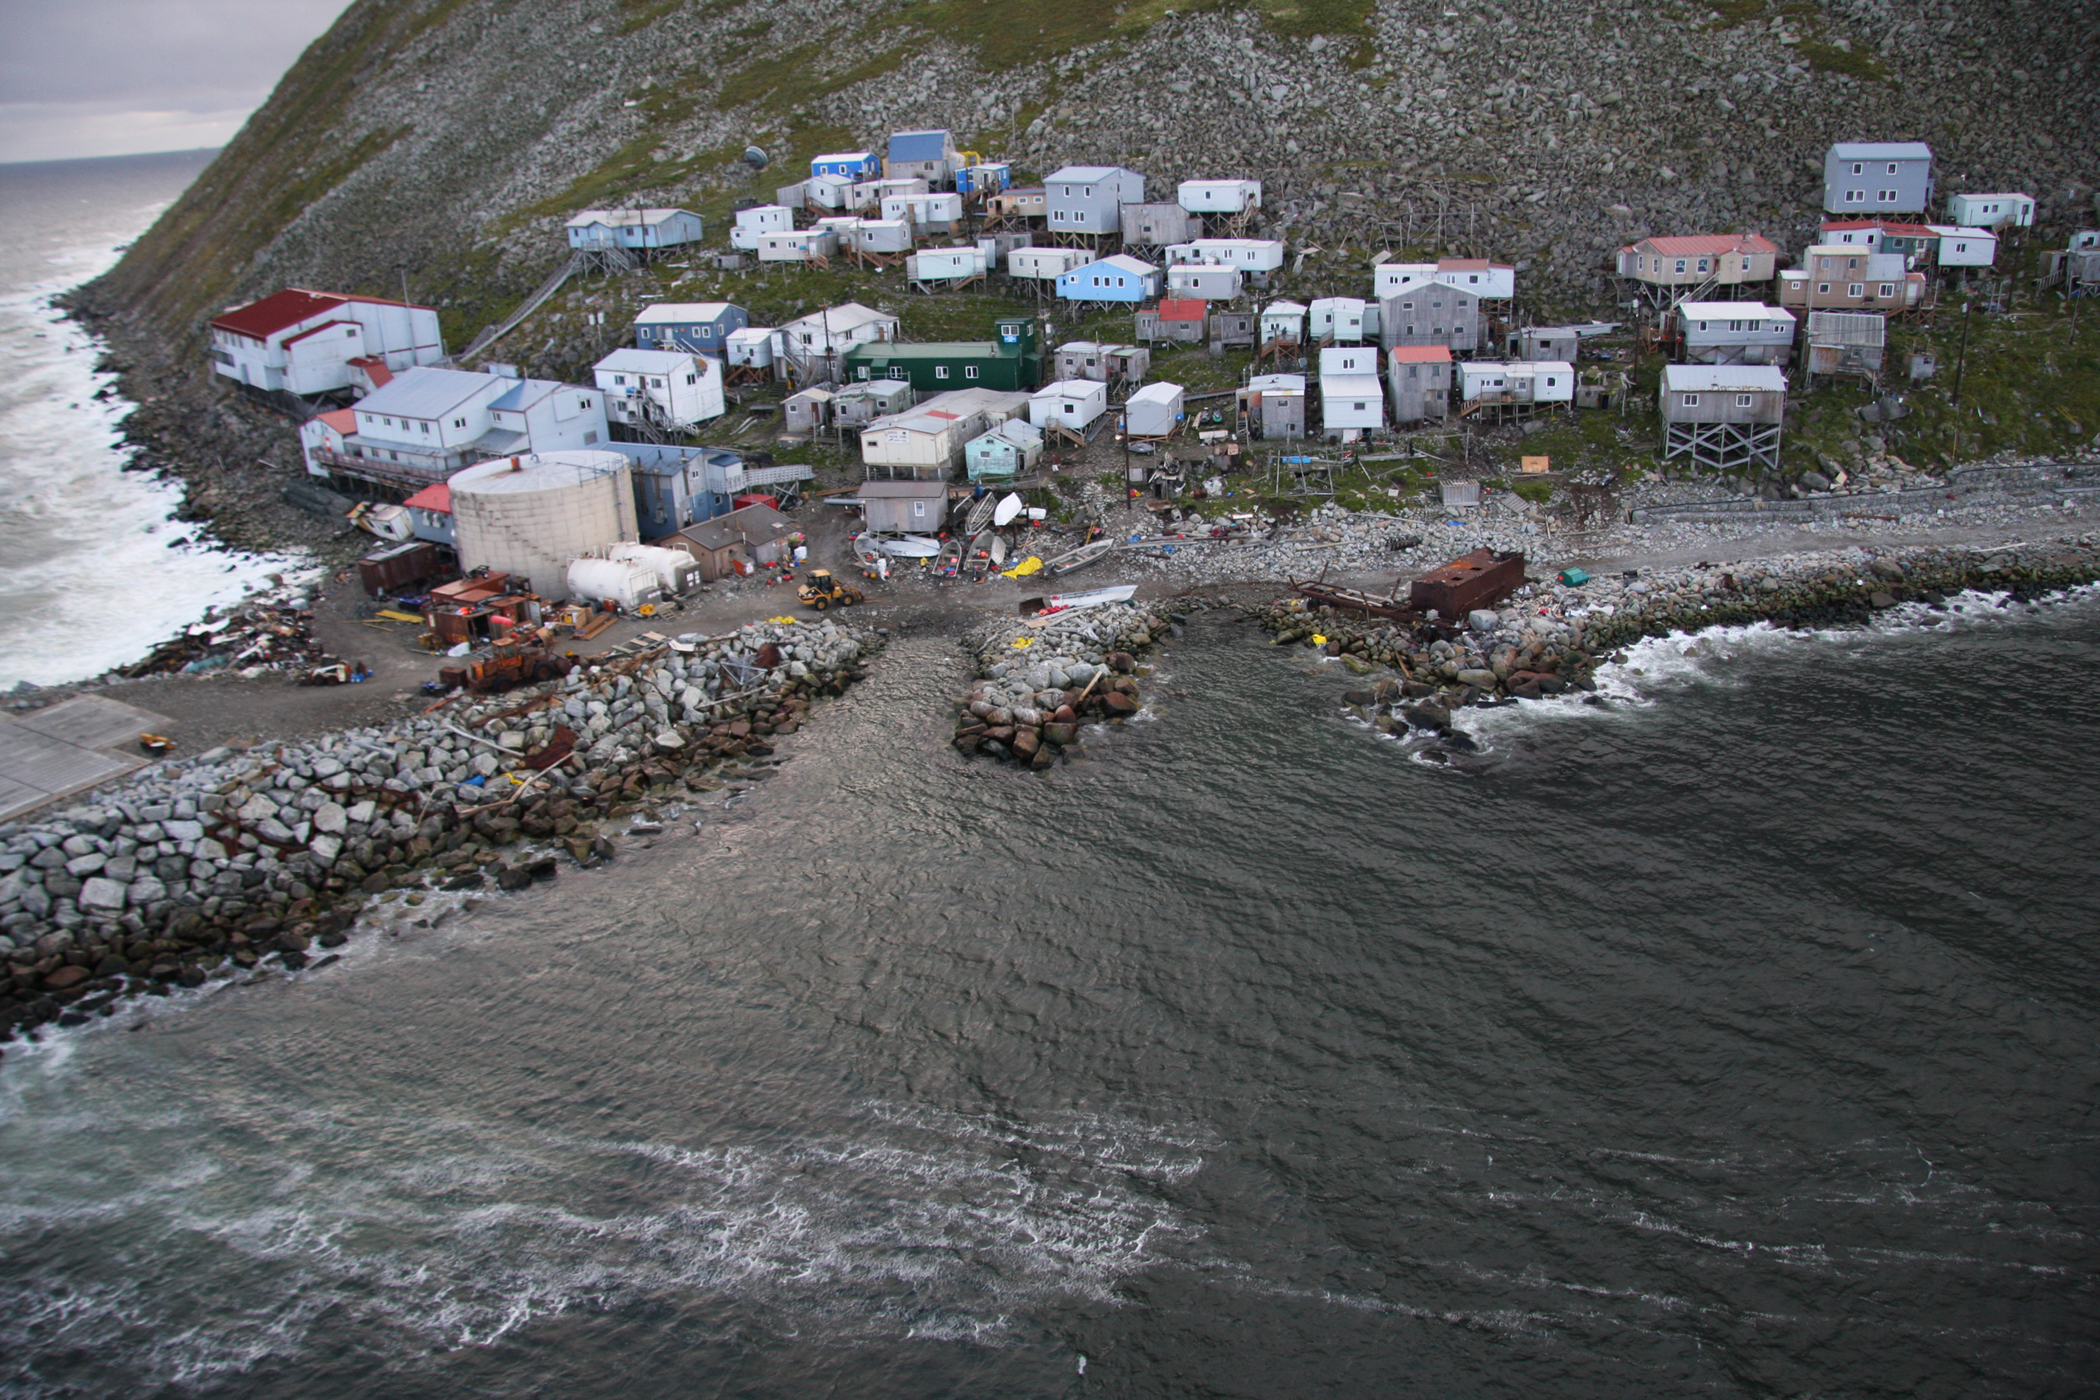 The native village of Little Diomede sits on the border of Russia and the United States. (U.S. Coast Guard Photo by Petty Officer Richard Brahm)